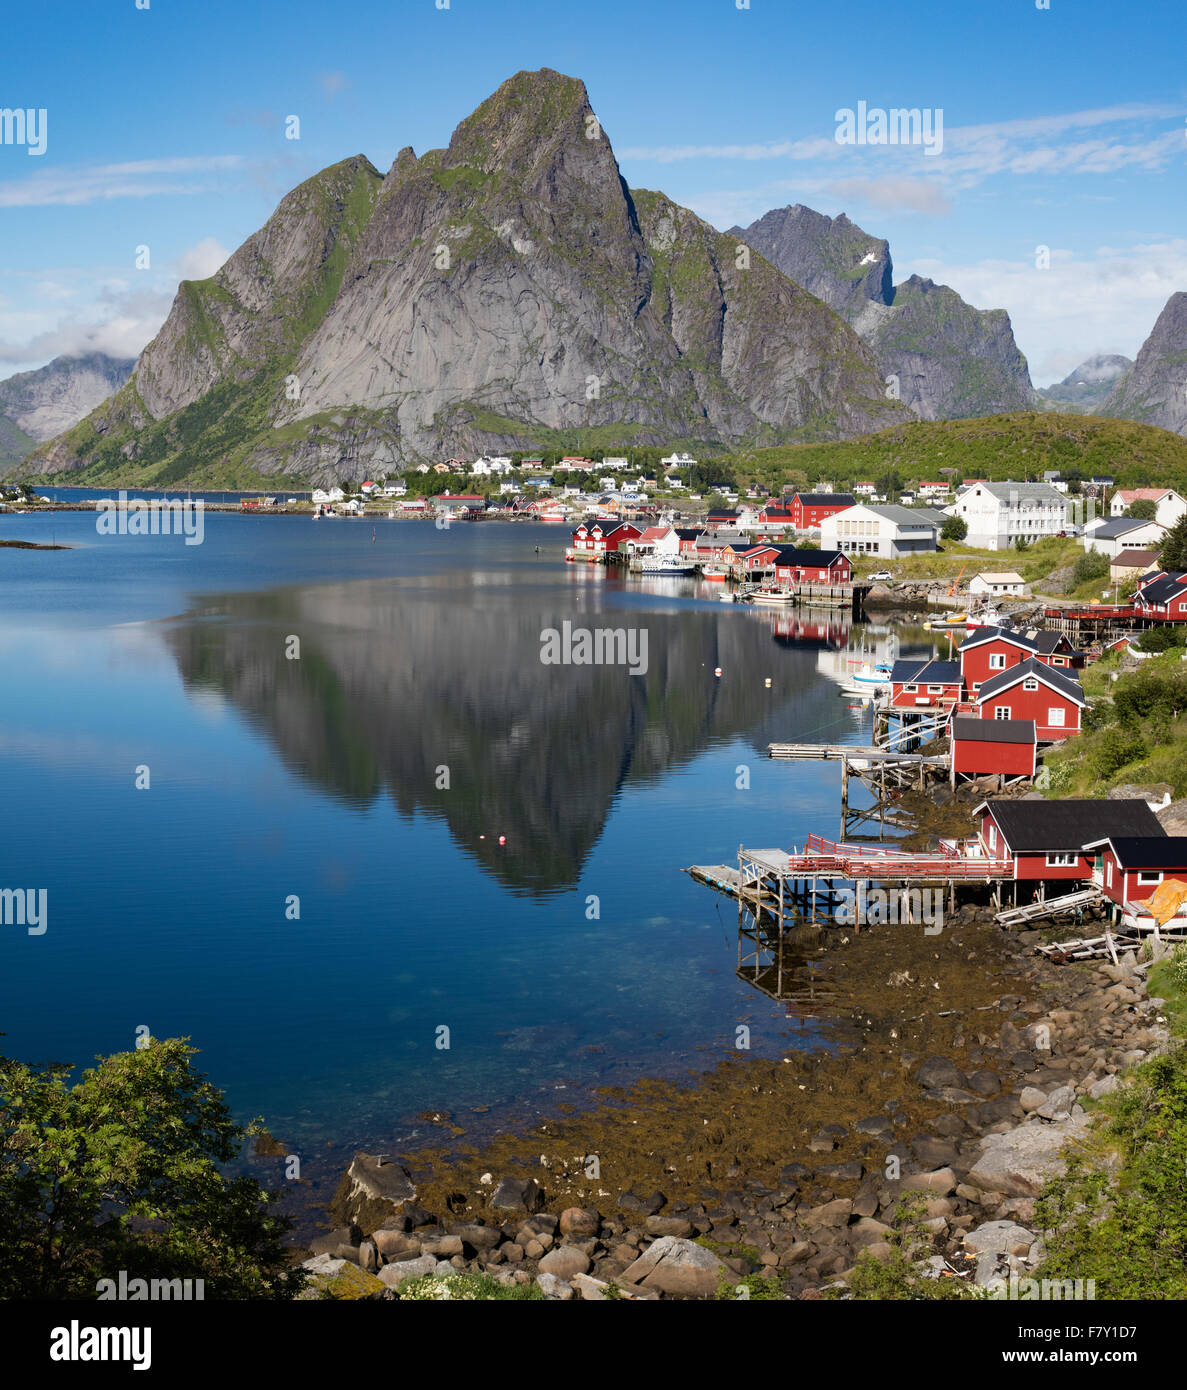 The spectacularly sited town and harbour of Reine in the western Lofoten Islands in Norway Stock Photo